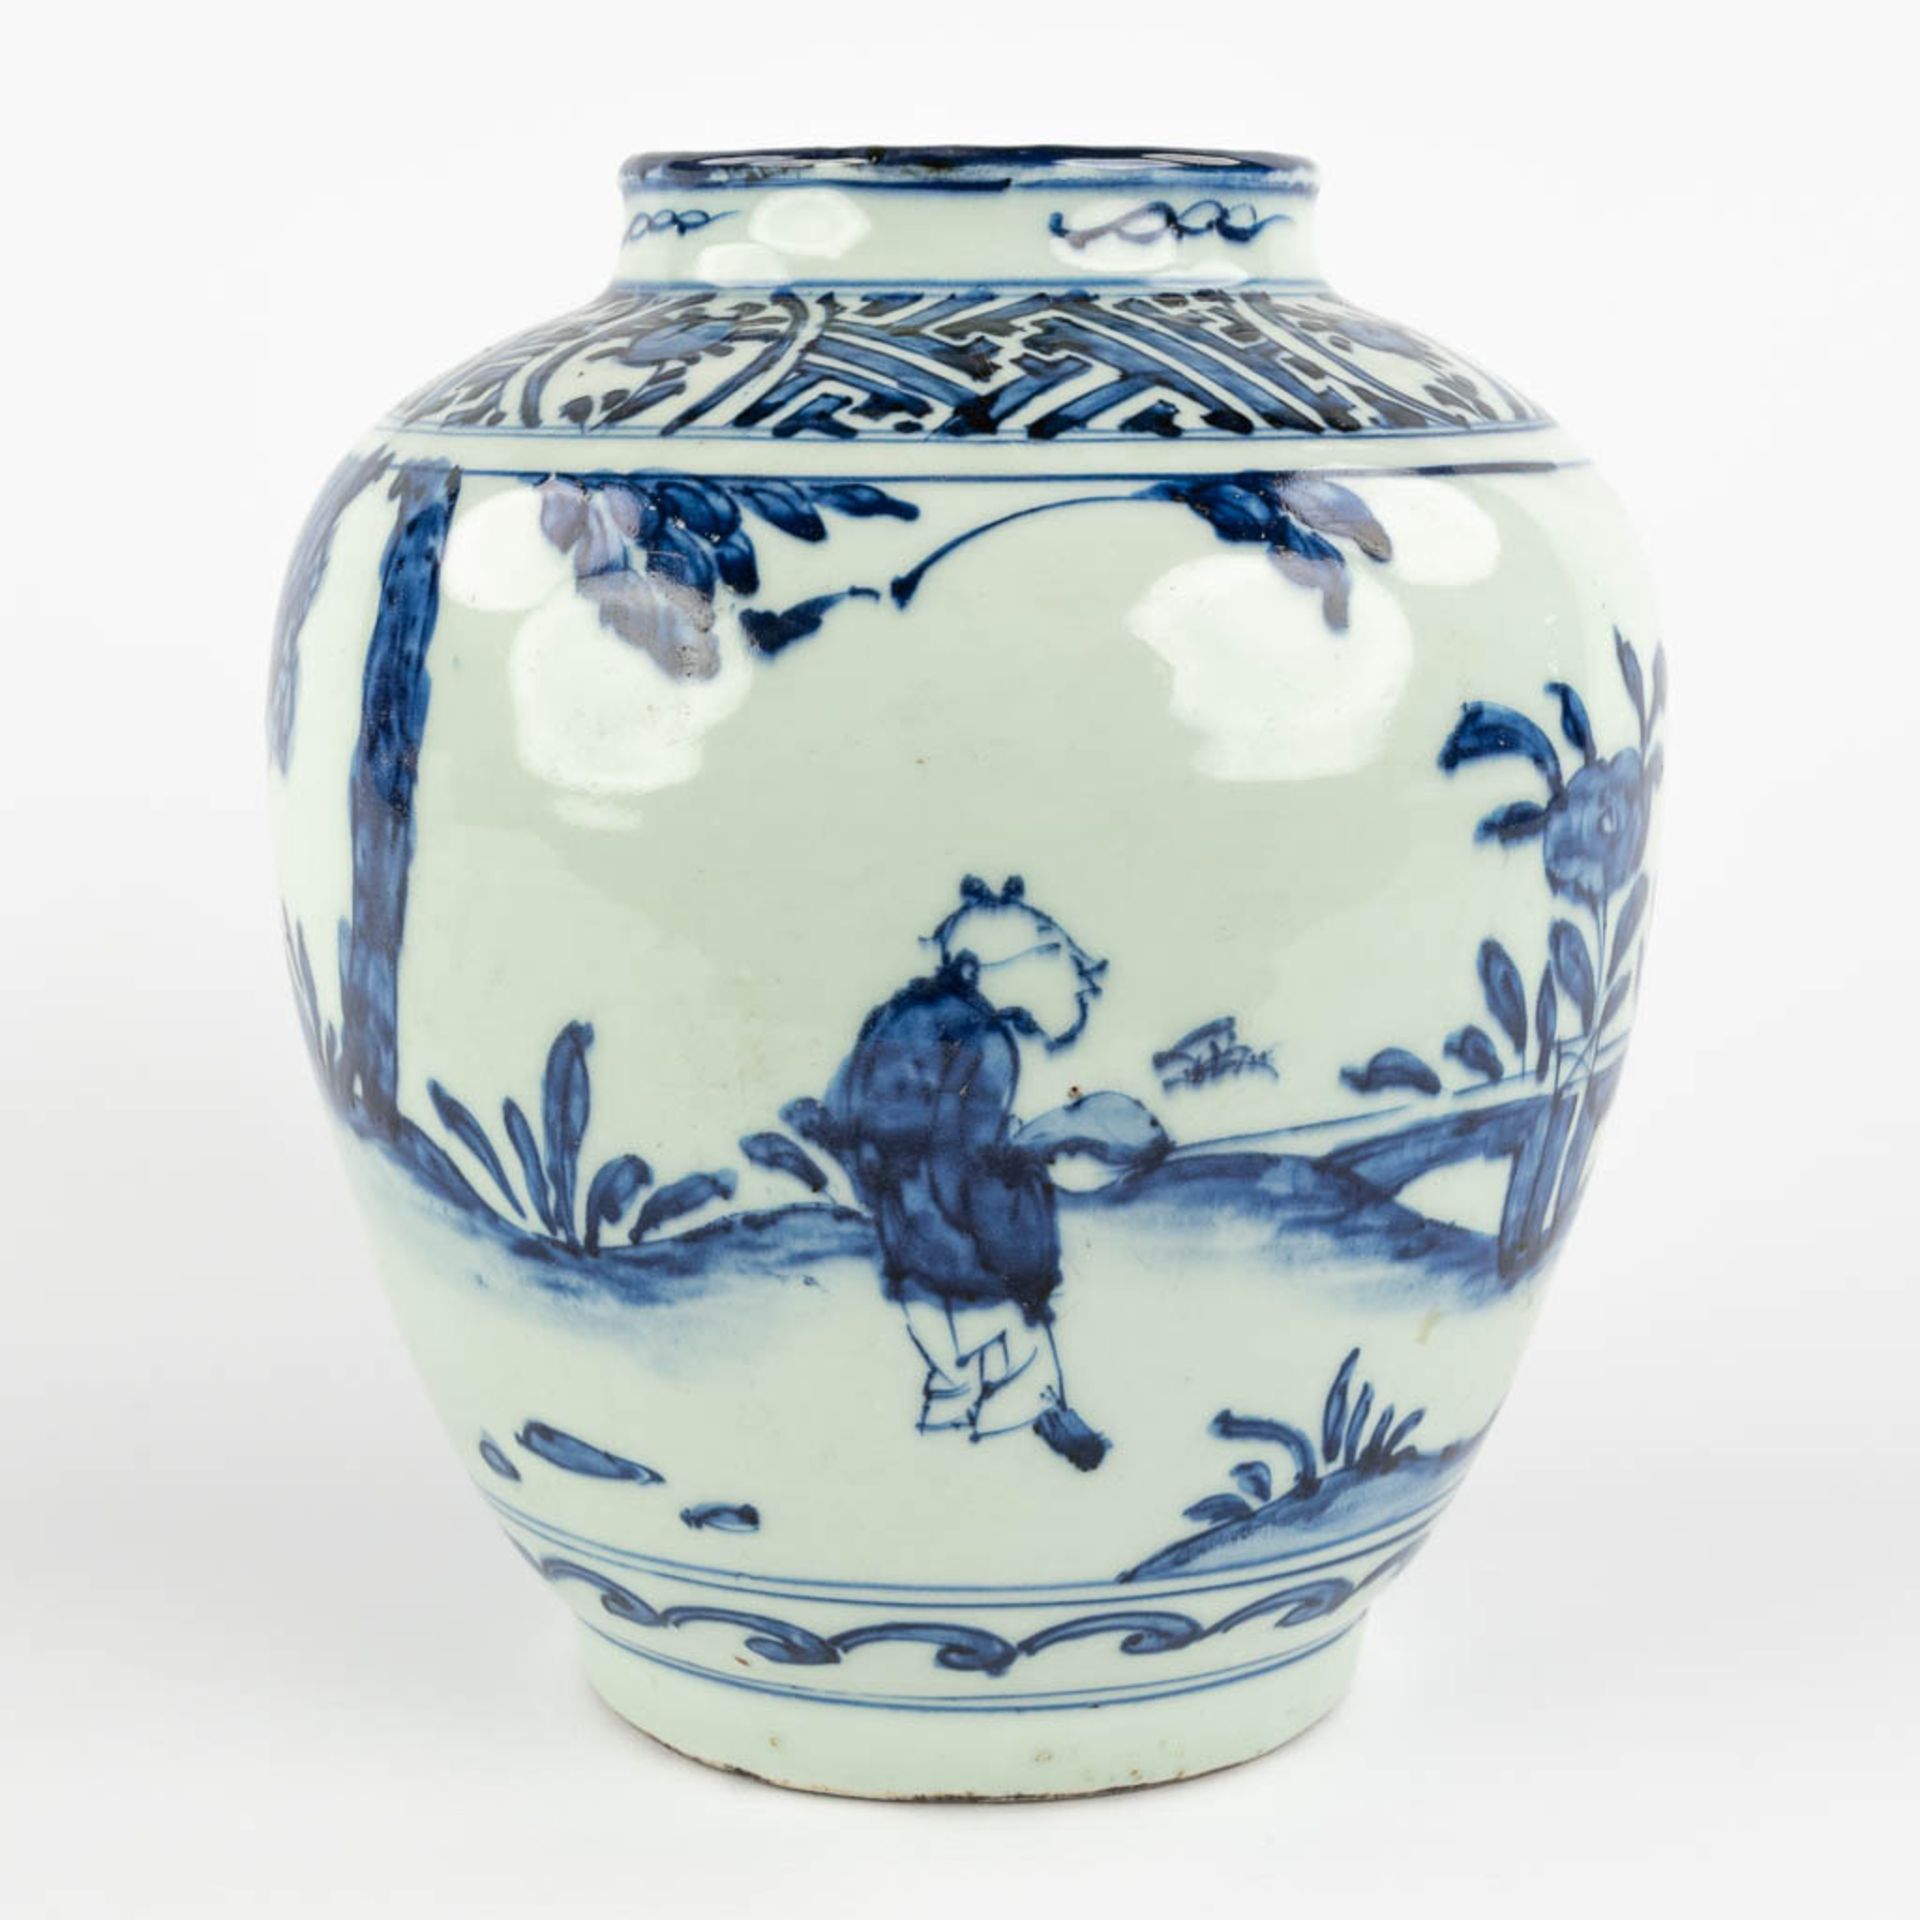 A Chinese pot with blue-white decor of a landscape with figurine. Possibly 17th C. (H:23 x D:20 cm) - Bild 4 aus 11